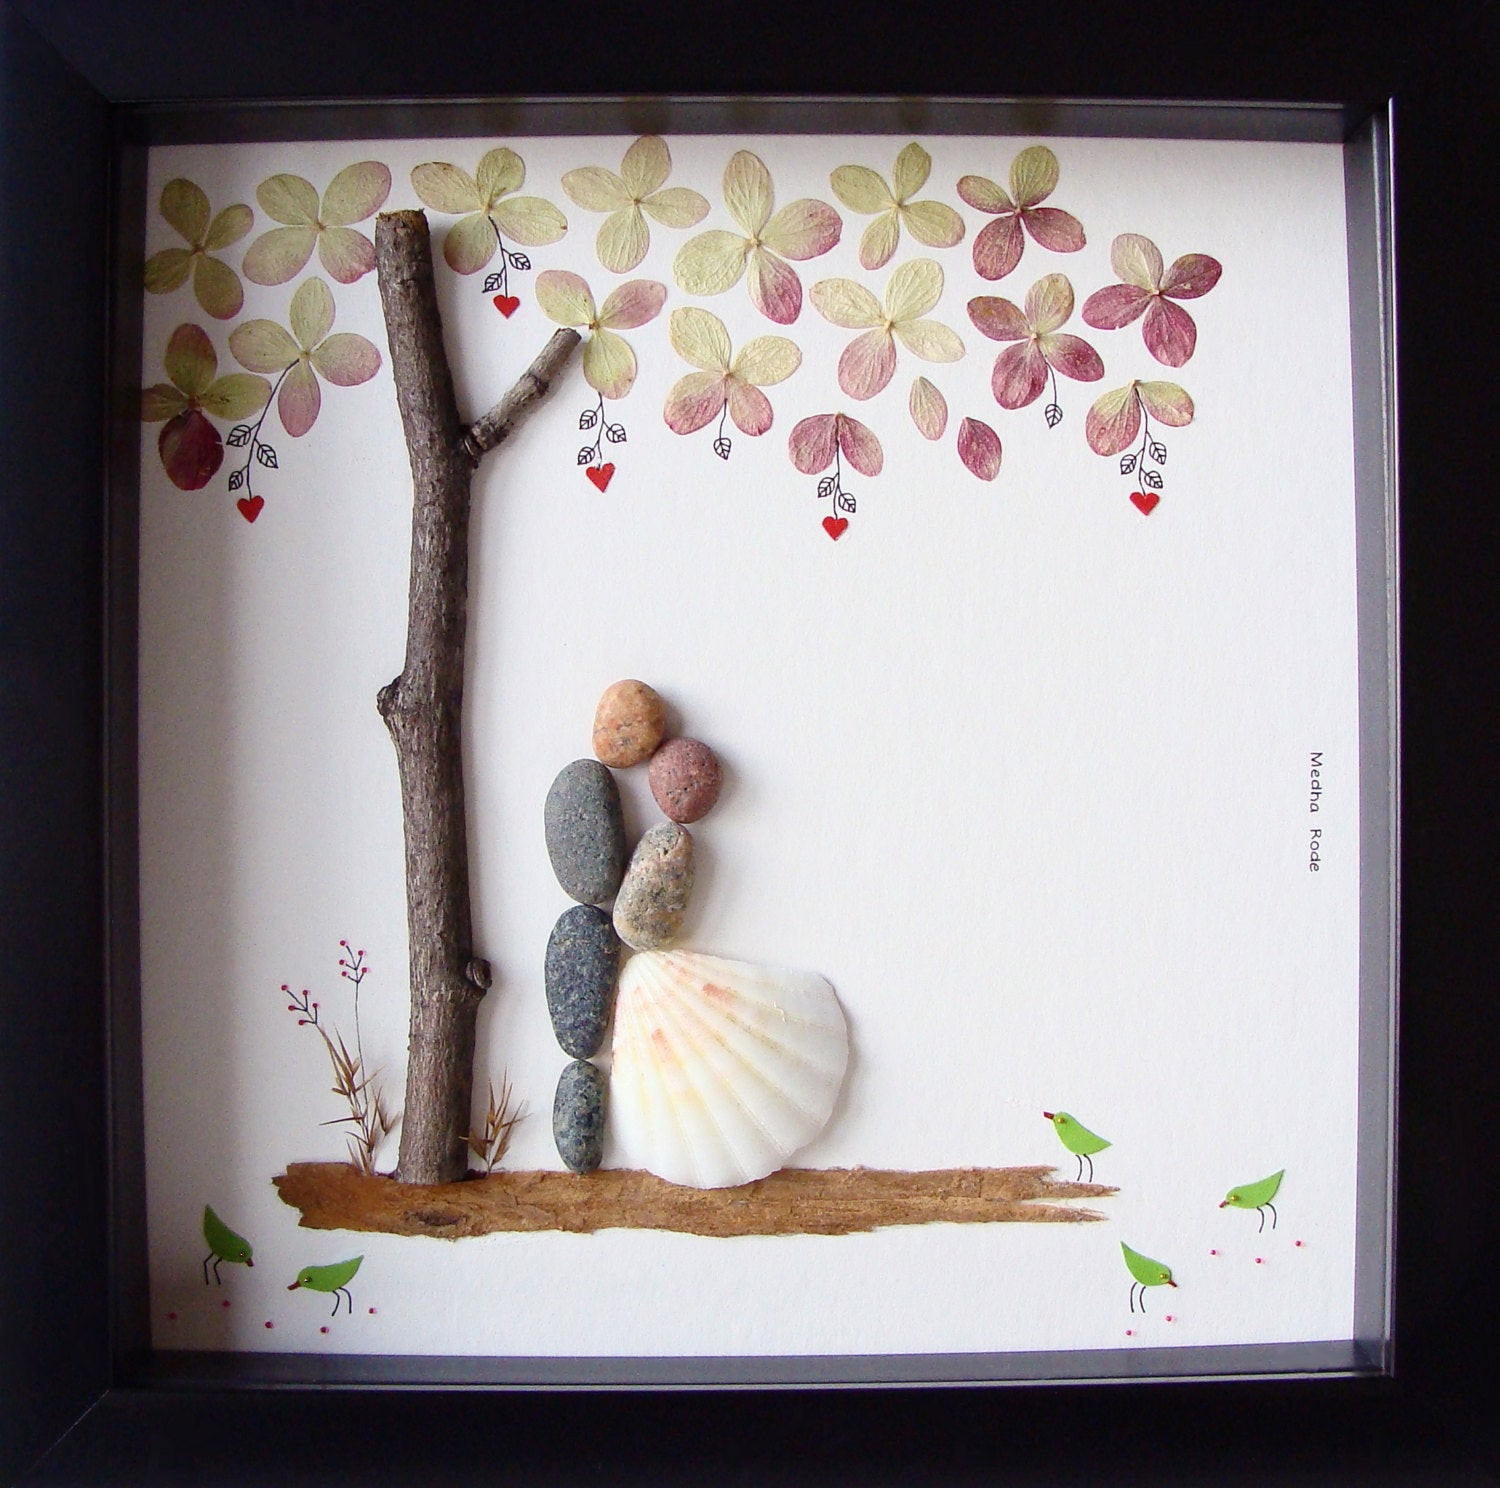 Unique Wedding Gifts Ideas
 Unique Wedding Gift For Couple Wedding Pebble Art by MedhaRode